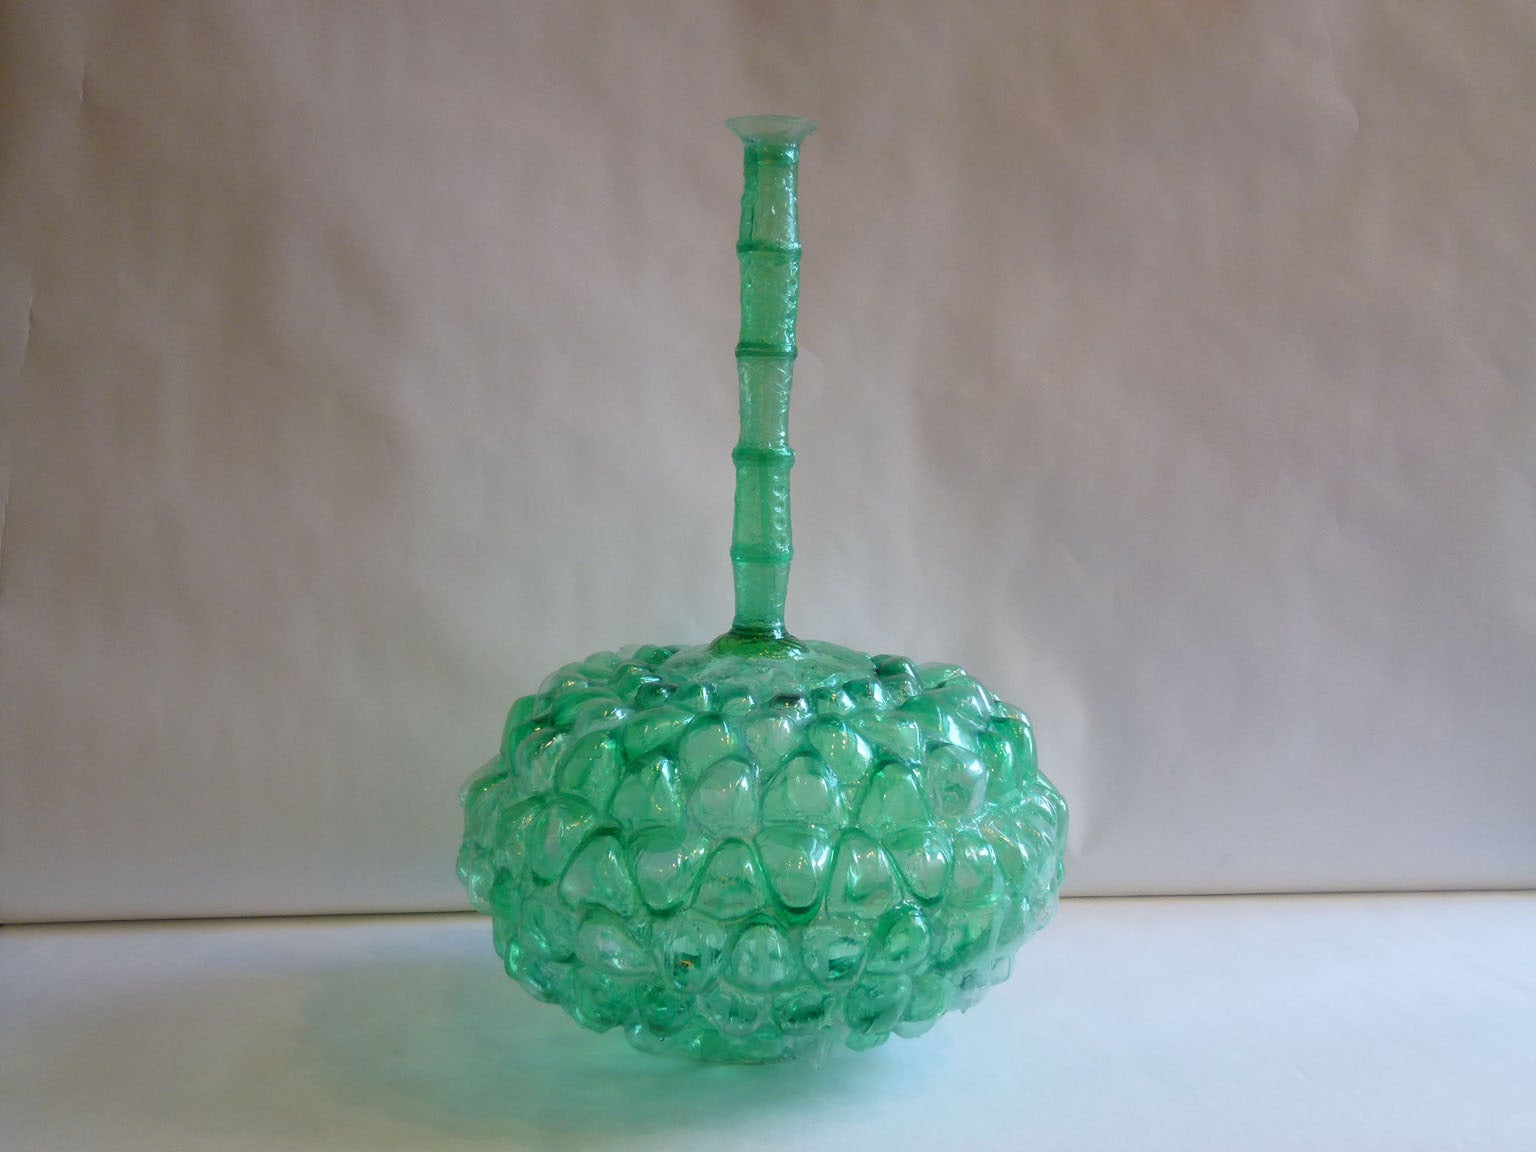 Shari Mendelson Green Bumpy Vessel with Long Neck, USA 2013